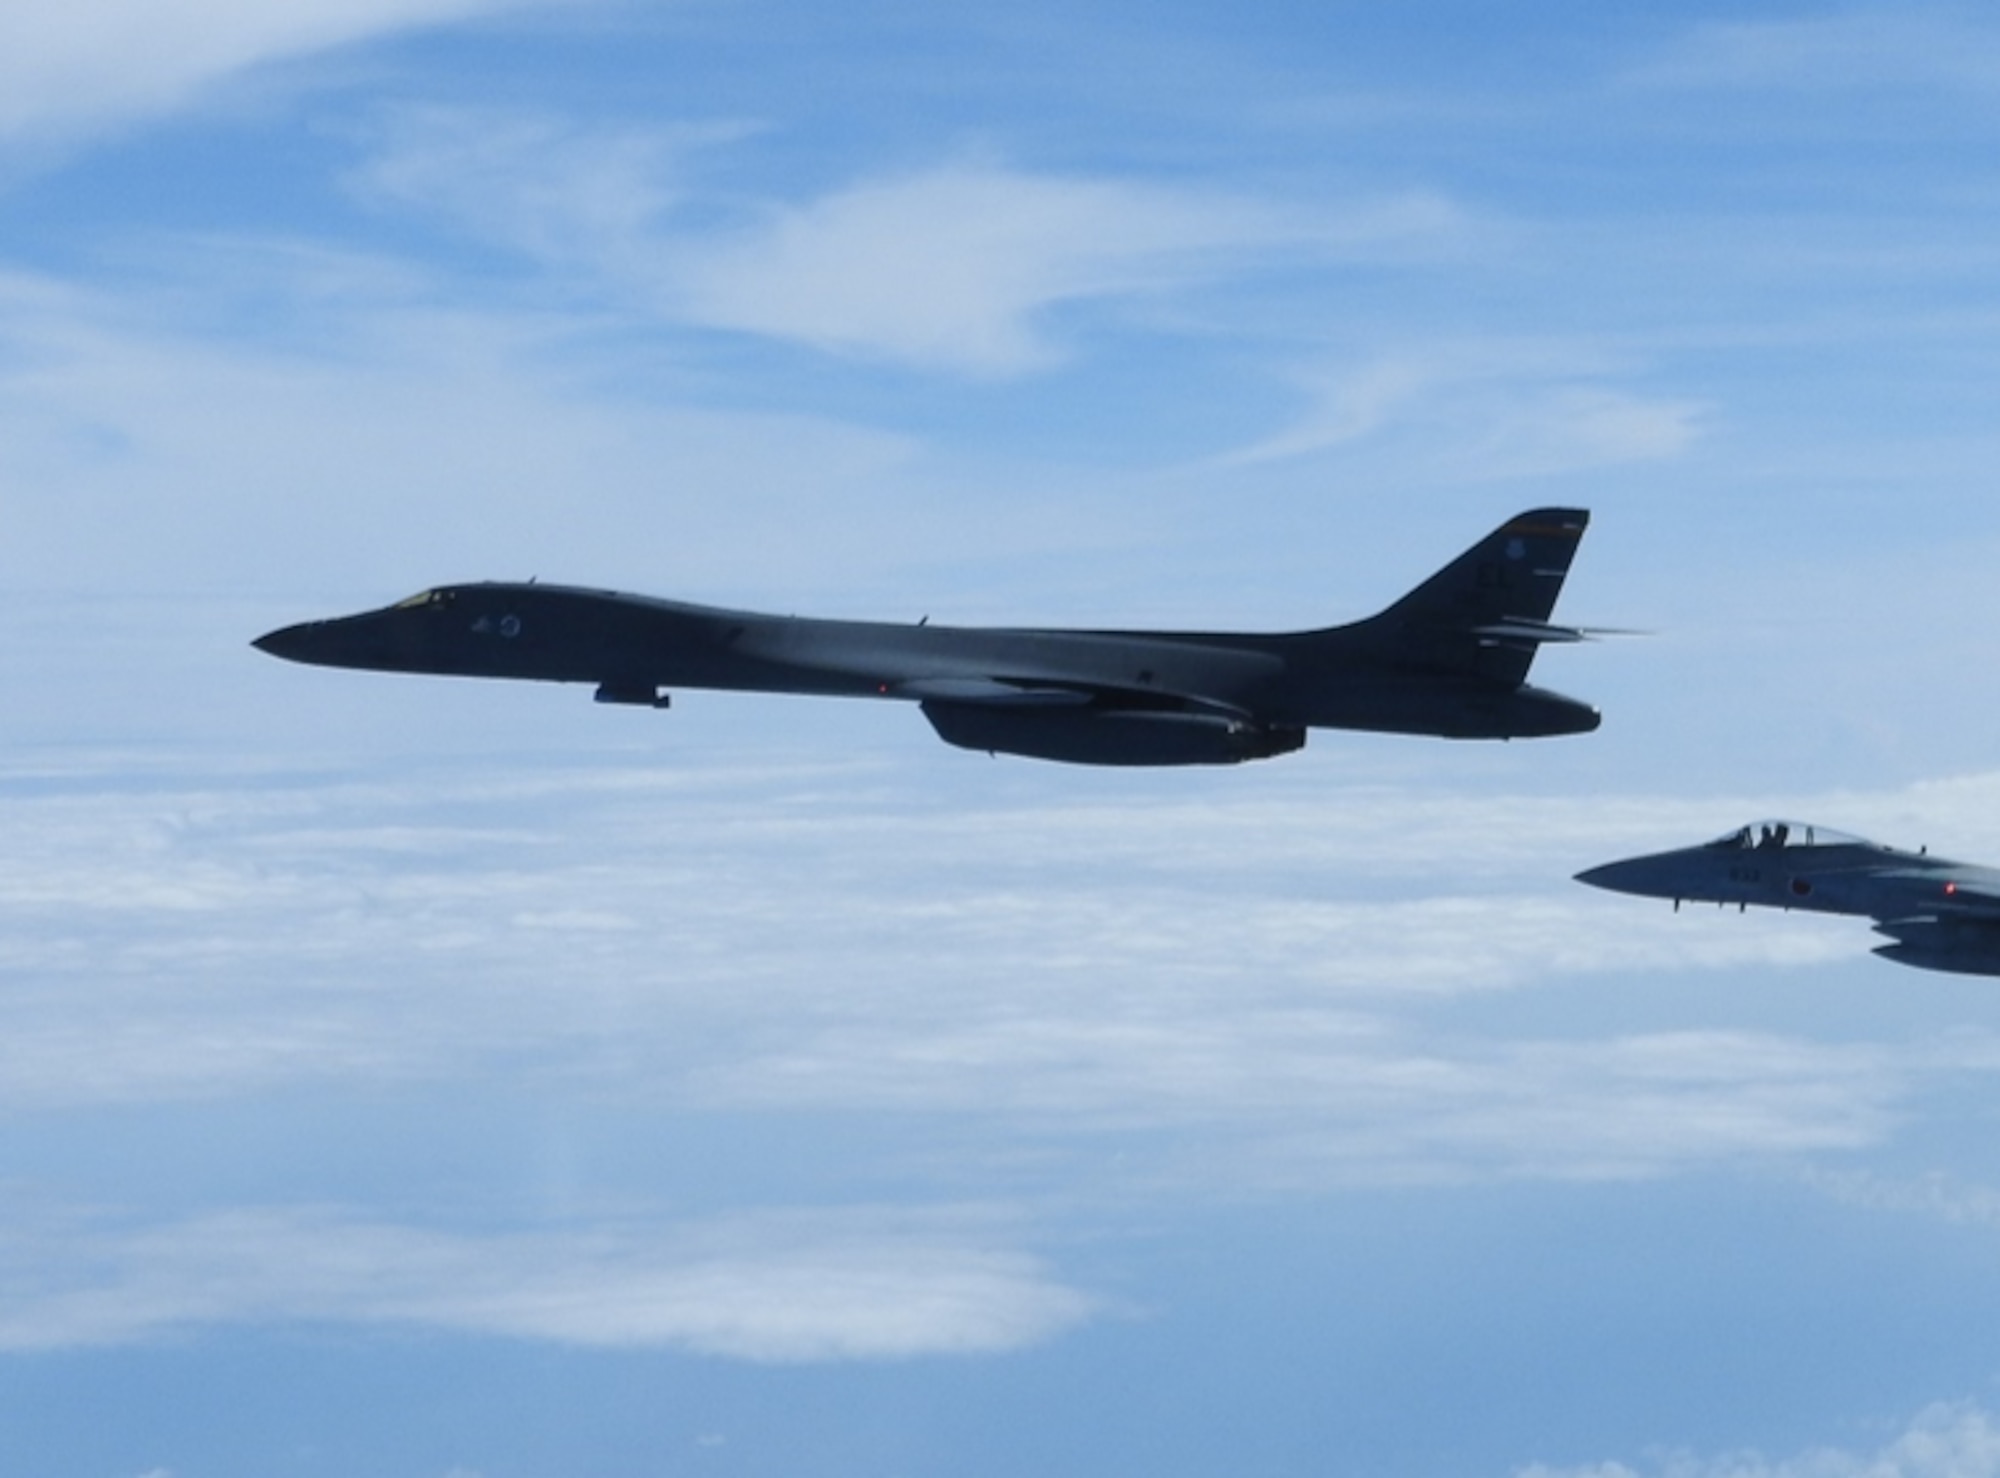 A B-1B Lancer conducts integration training with the Koku-Jieitai, or Japanese Air Self-Defense Force (JASDF) in the vicinity of Japan, July 27, 2020. The B-1s integrated with Koku-Jietai F-2s to enhance bilateral interoperability and mutual readiness between the U.S. and Japan. (Photo Courtesy of JASDF)